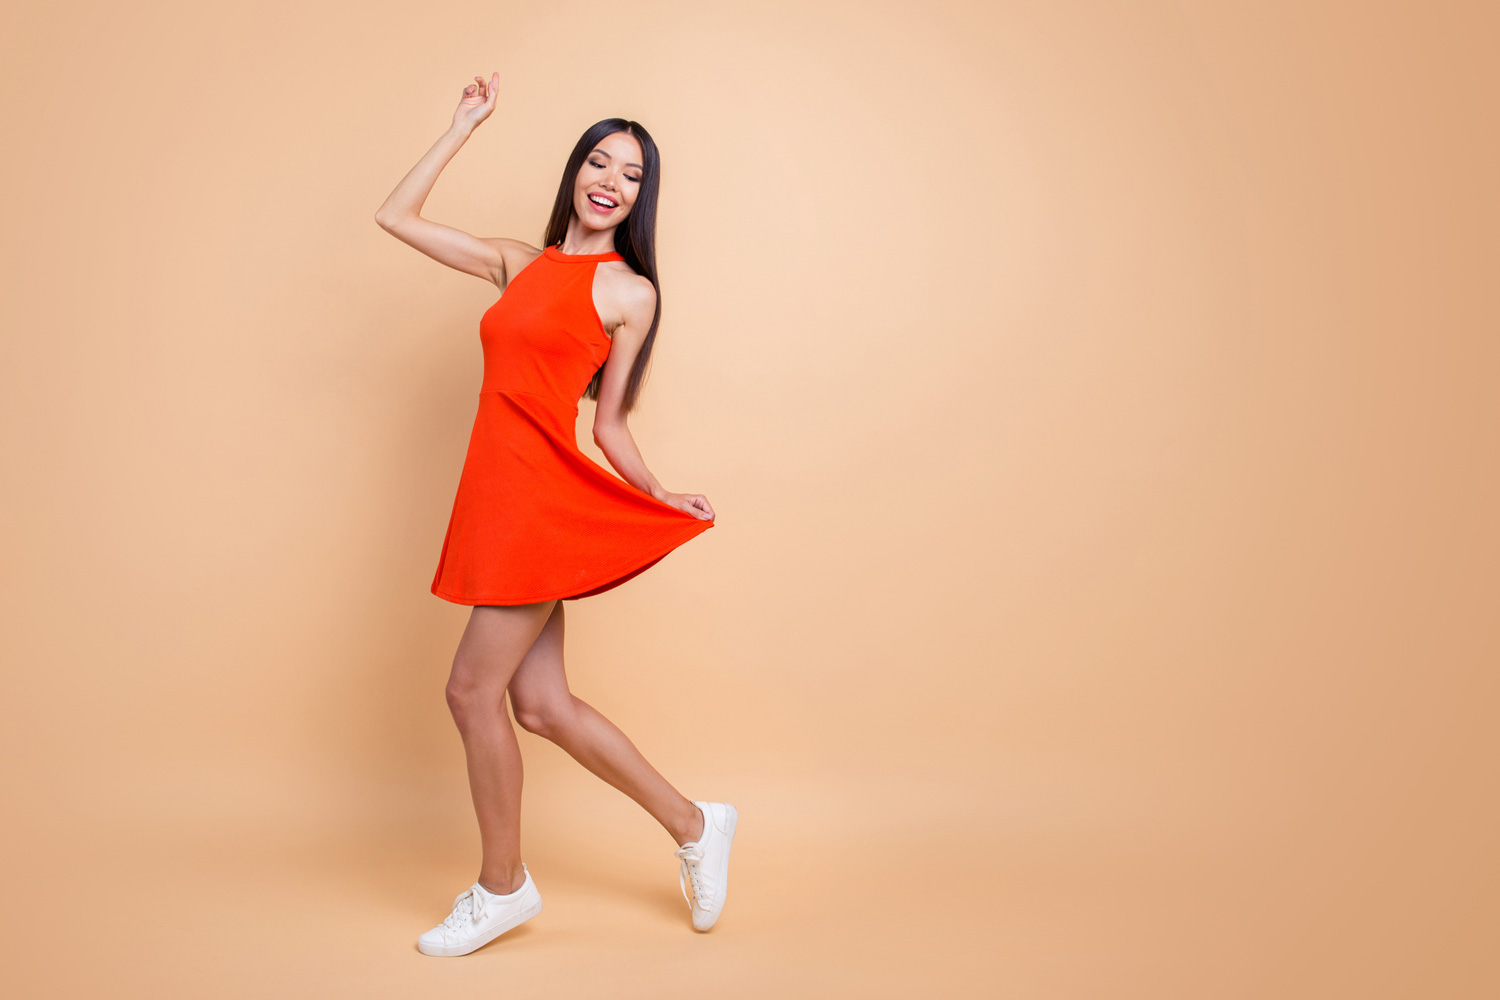 A young woman in an orange dress celebrating varicose veins recovery.